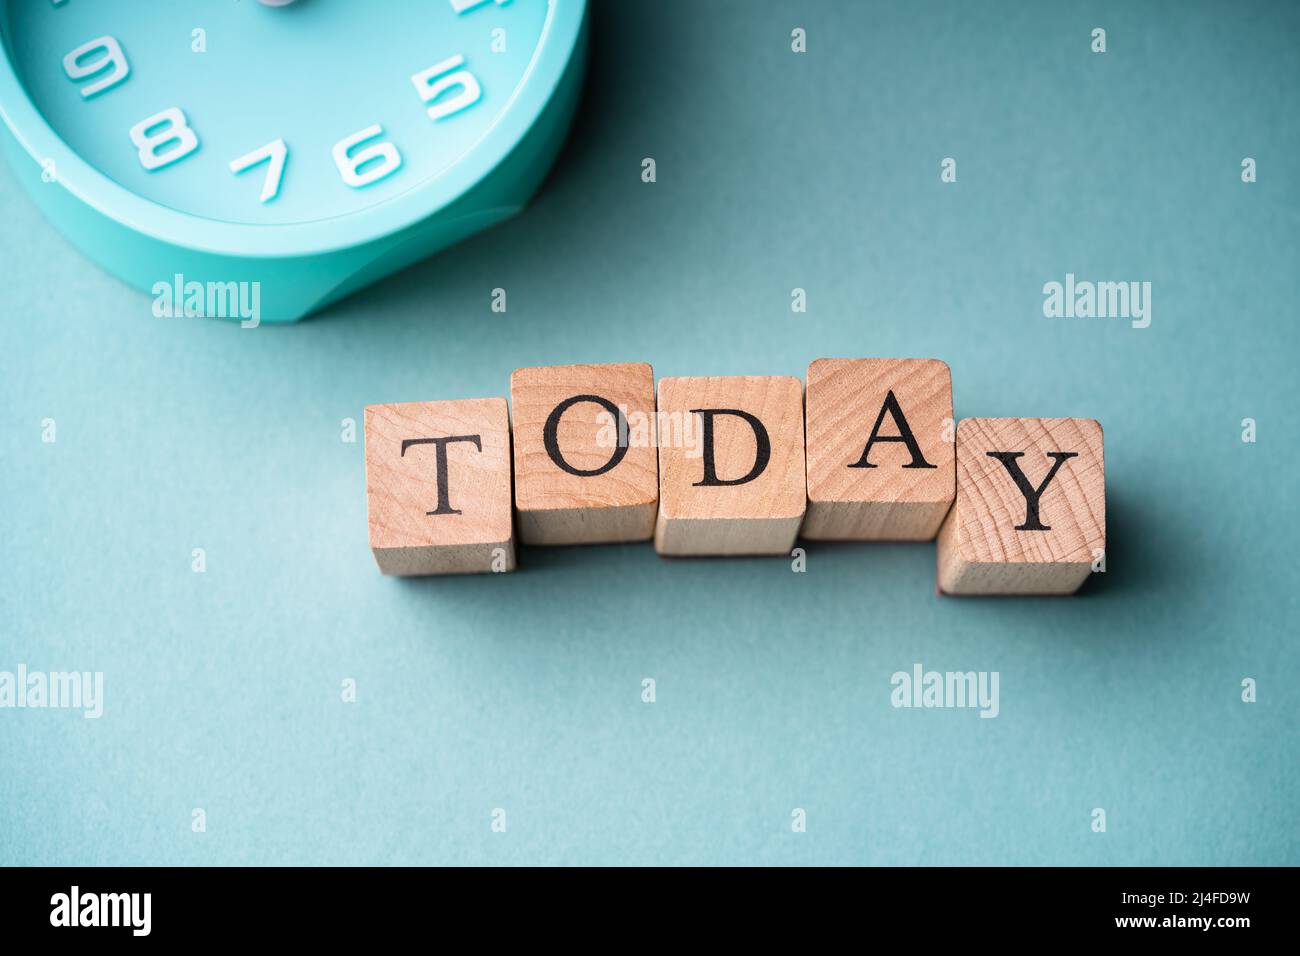 Today Word Inspiration Business Concept. Motivation Message Stock Photo